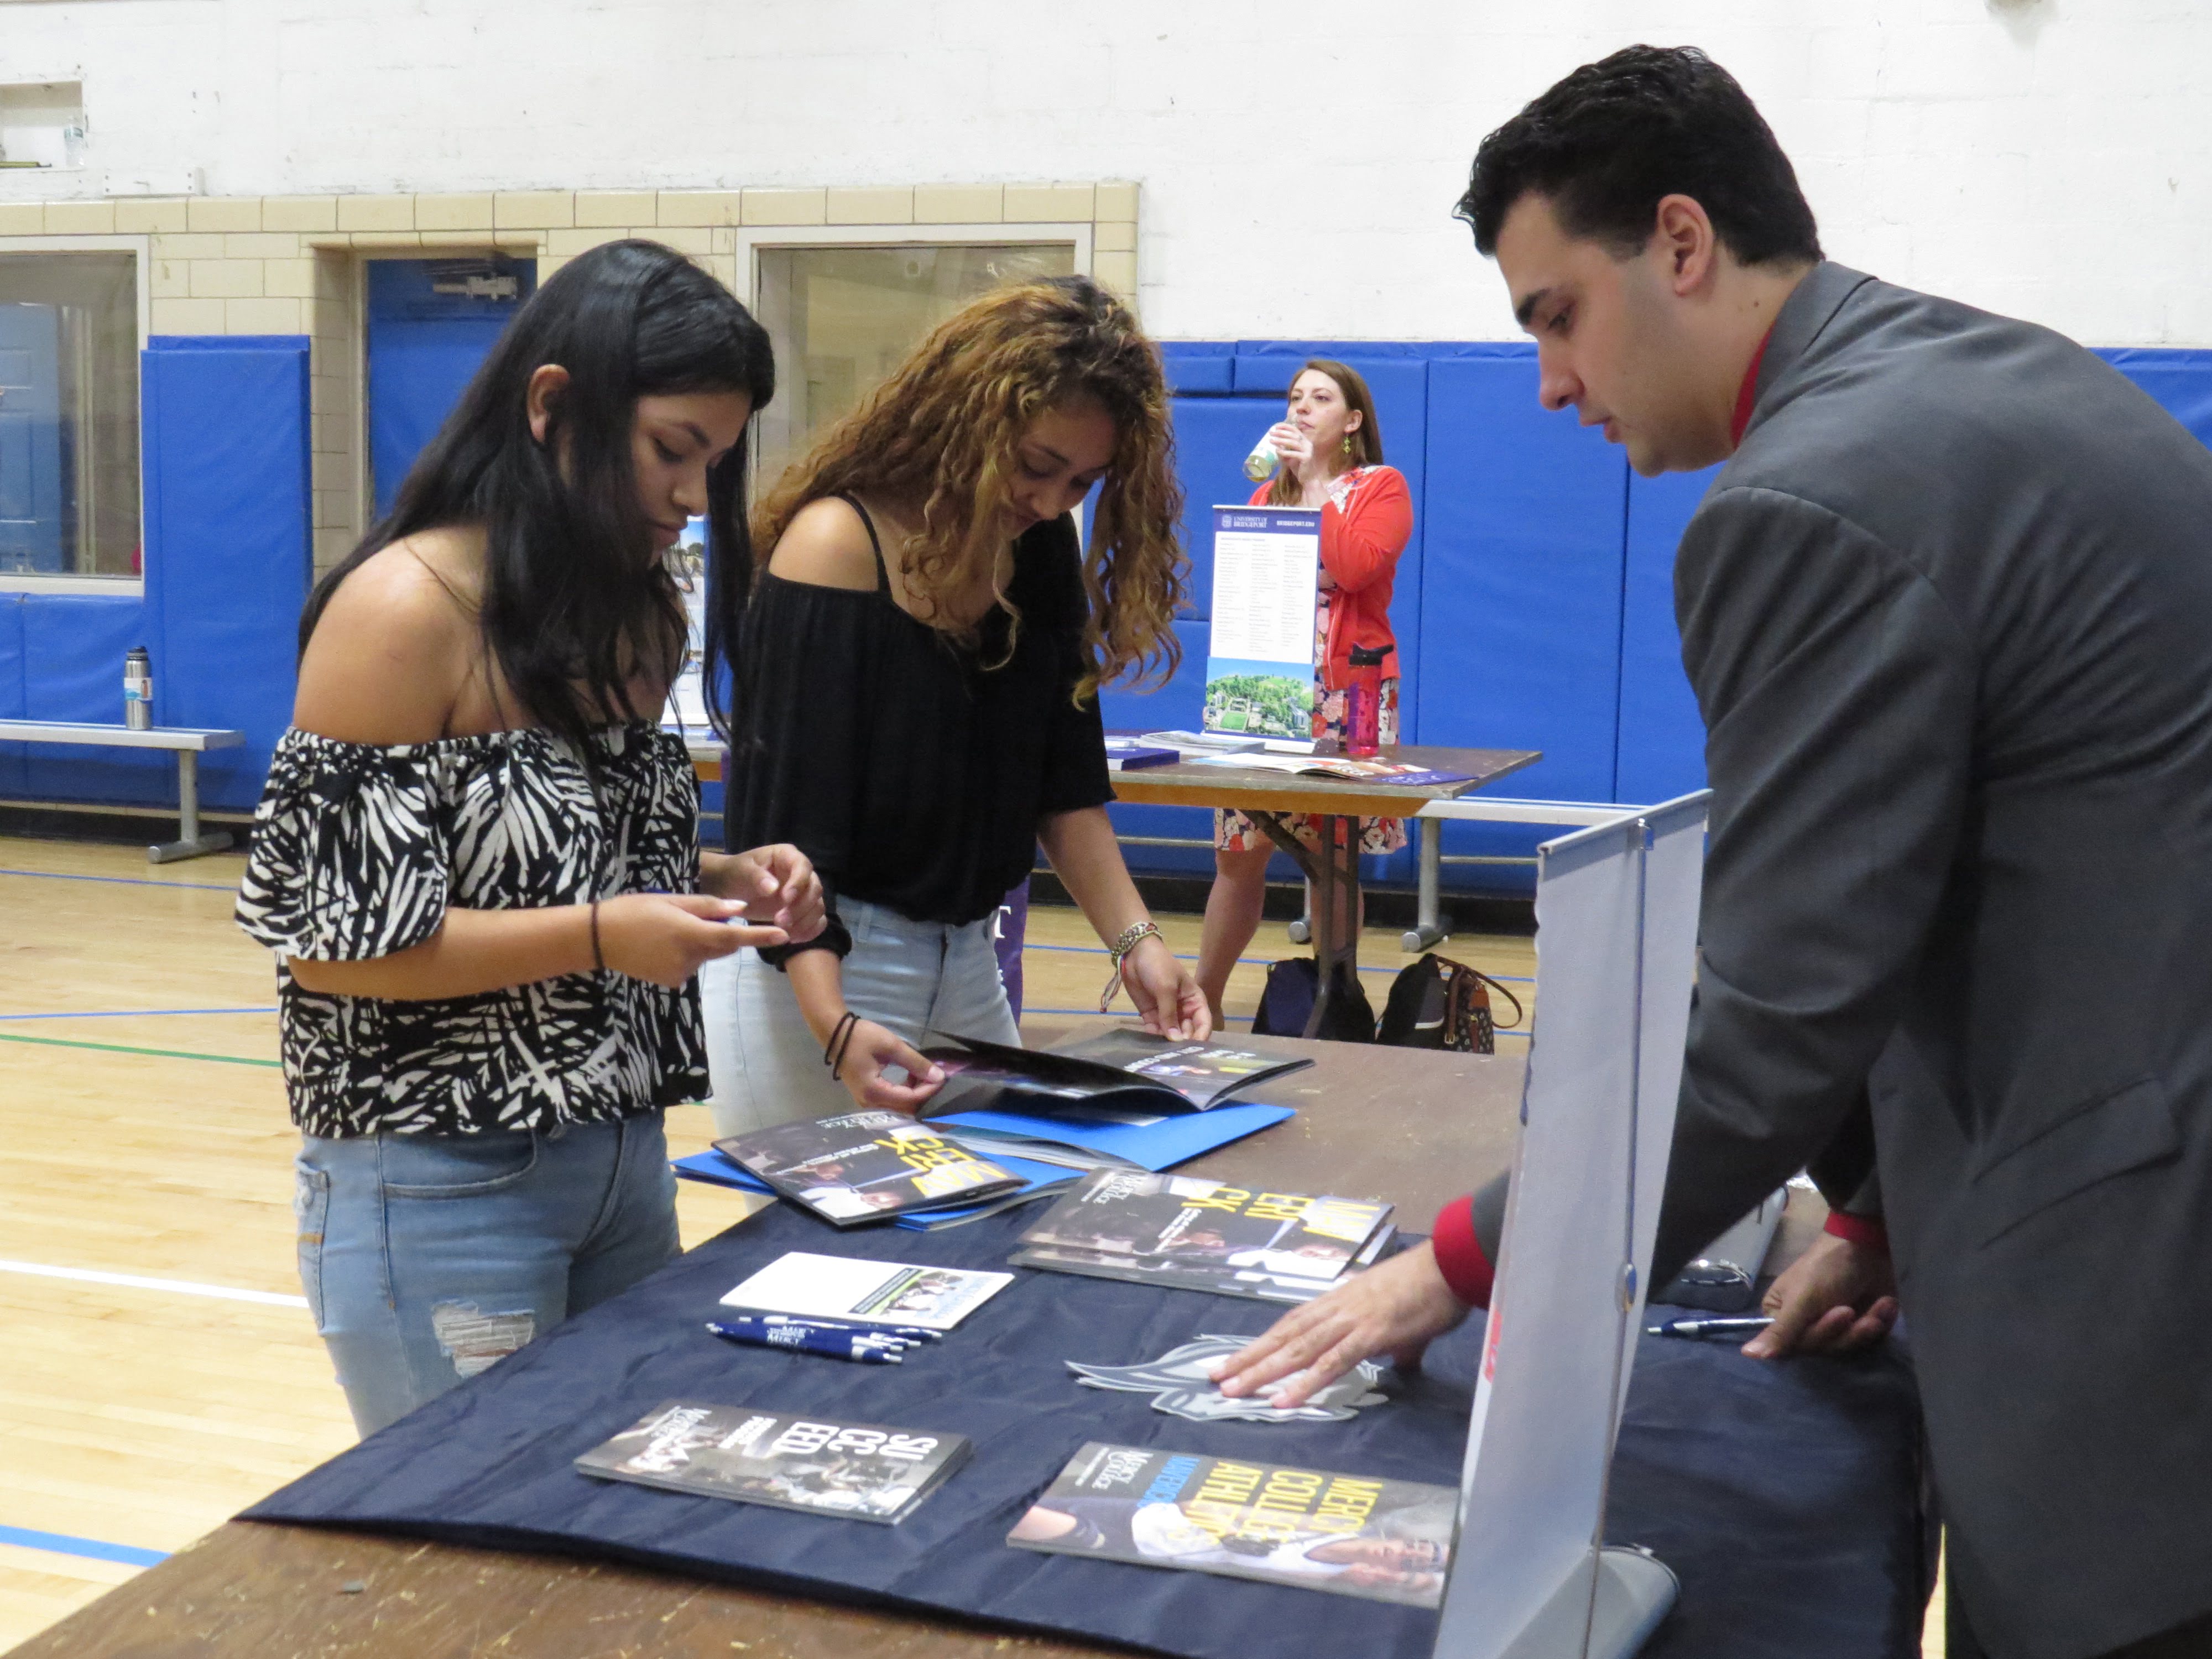 Students learn about Mercy College. May 23, 2017. Photo: Devon Bedoya